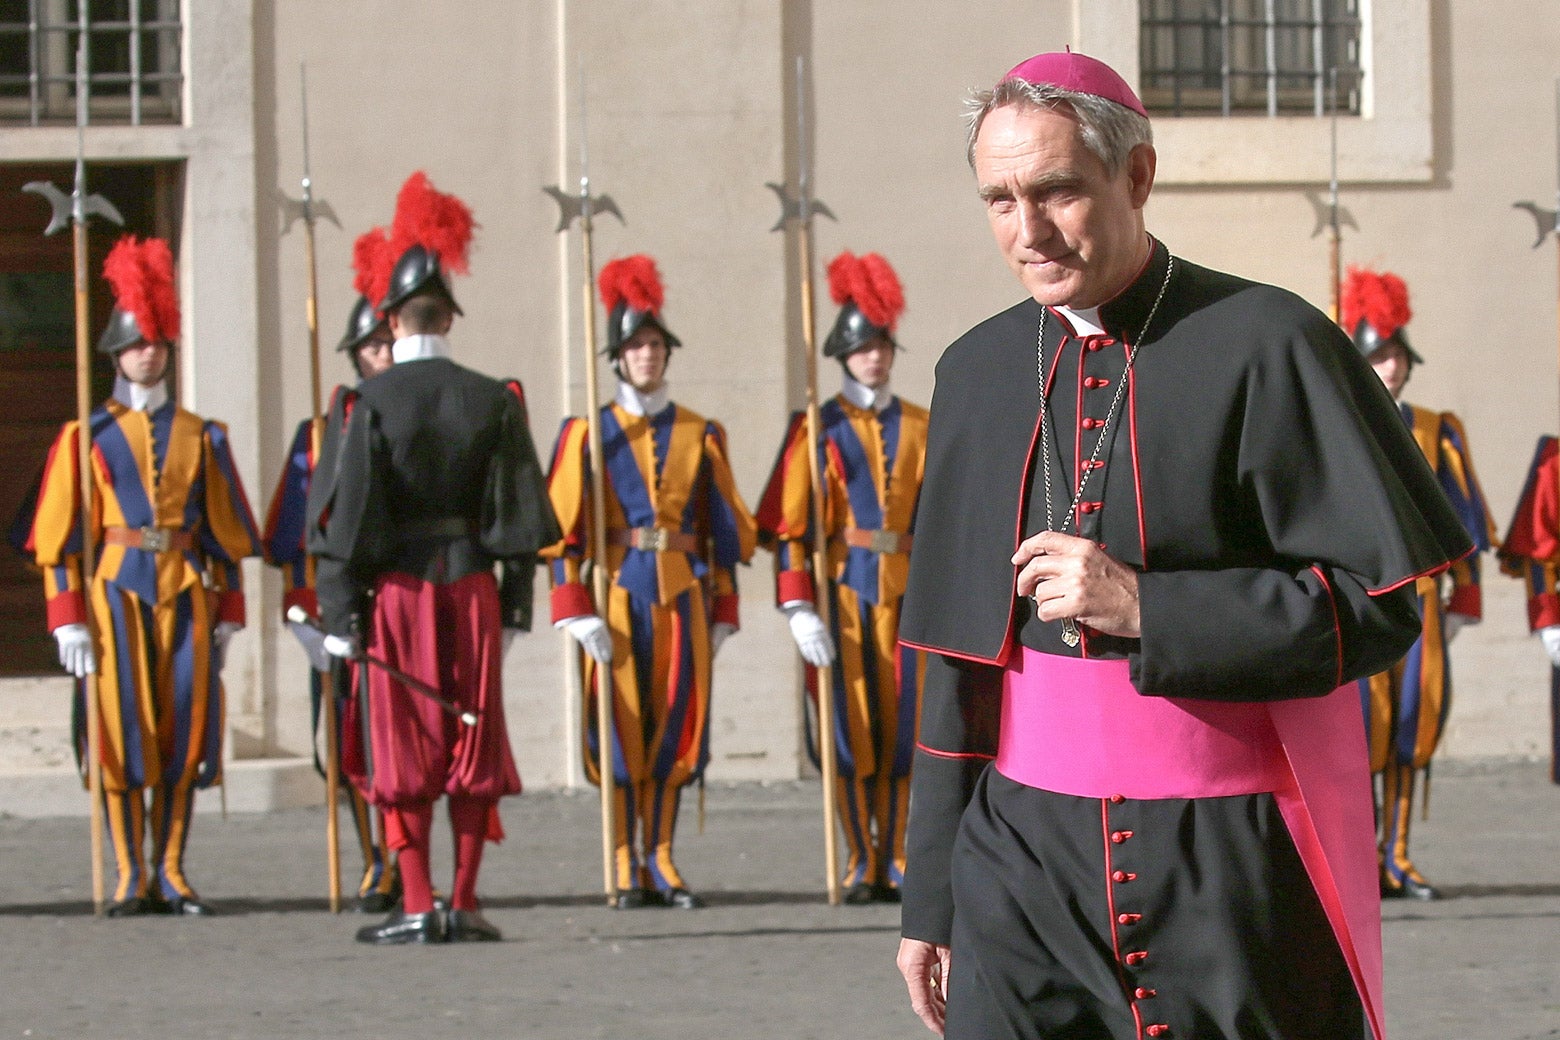 A man in papal garments, in front of guards in Vatican City.